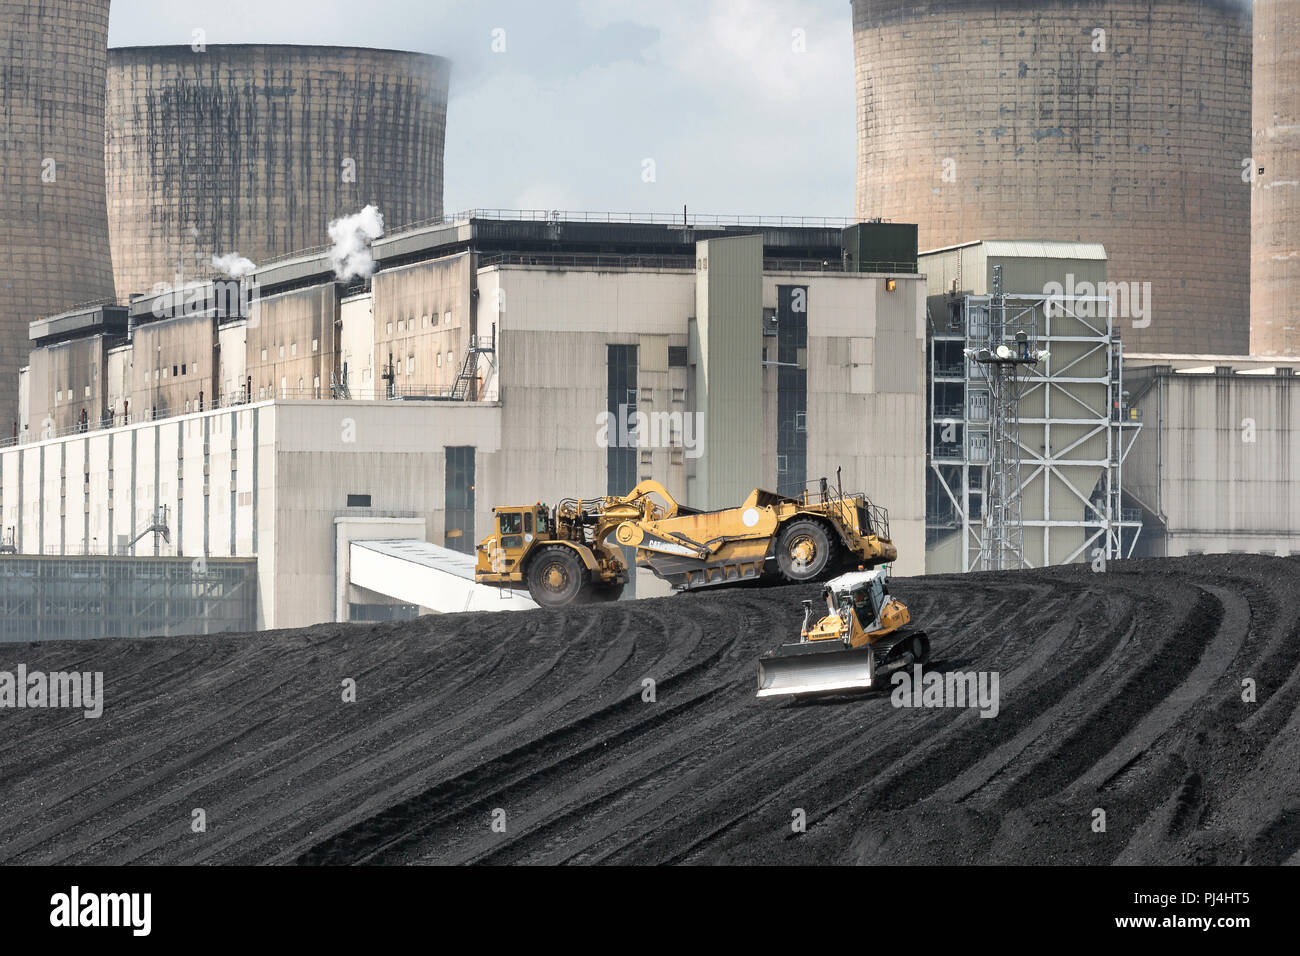 Plant Machinery on Coal Pile at Ratcliffe on Soar Power Station, Nottinghamshire Stock Photo